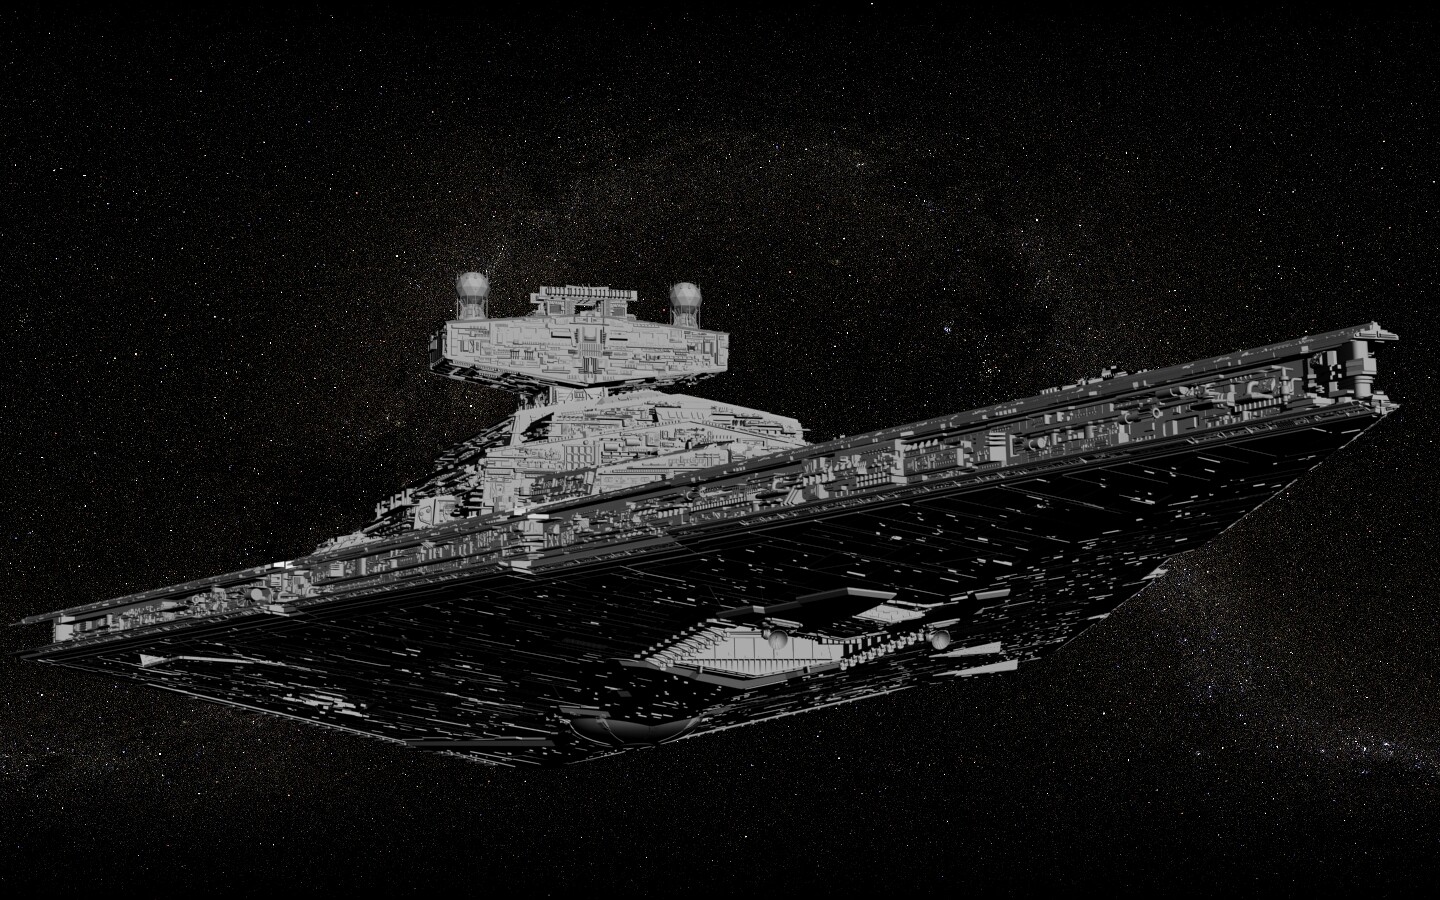 Imperial_Star_Destroyer_by_Witch_King_42.jpg